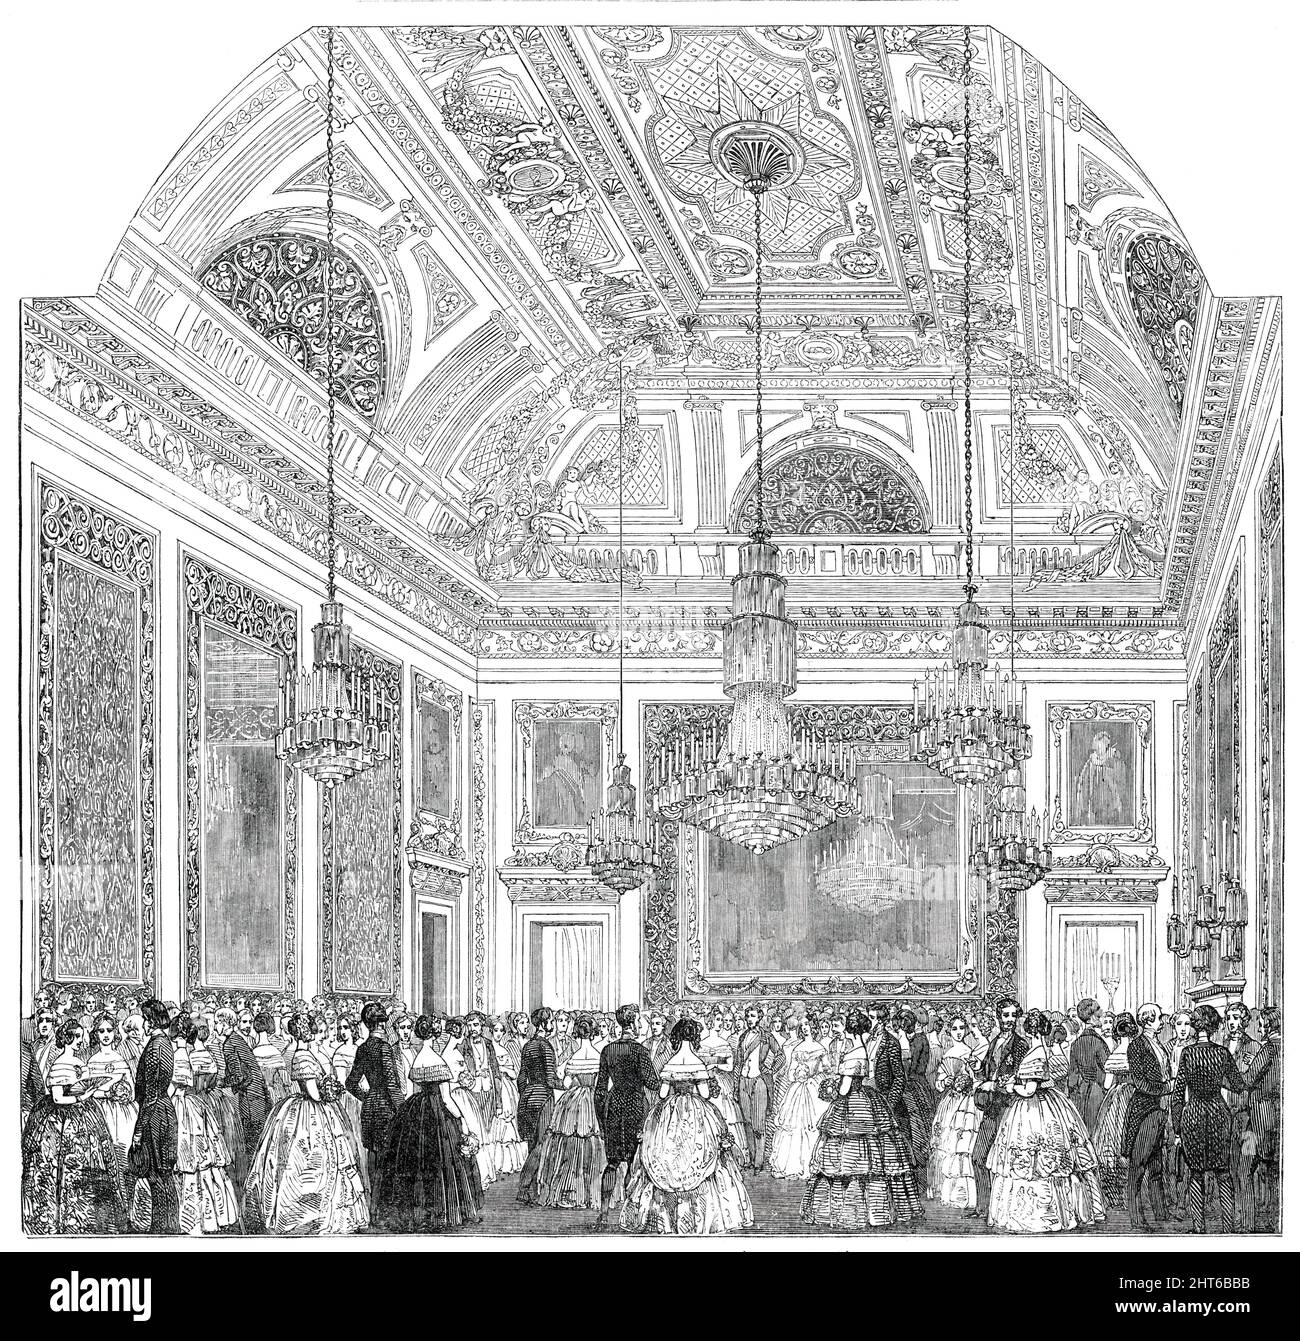 The Grand Saloon at Devonshire House, [London], 1850. The Duke of Devonshire's guests included '...the Duke of Cambridge, his Serene Highness Prince Edward of Saxe- Weimar, and about 800 members of the aristocracy...The Grand Saloon...is a magnificent apartment, and the decorations, designed by Mr. Crace...in the style of the celebrated artist Le Brun...The saloon originally was the entrance vestibule, but it now forms one of the most magnificent apartments in the building, a new grand staircase having been built by the Duke of Devonshire...When used as a ball-room, the furniture of this saloo Stock Photo